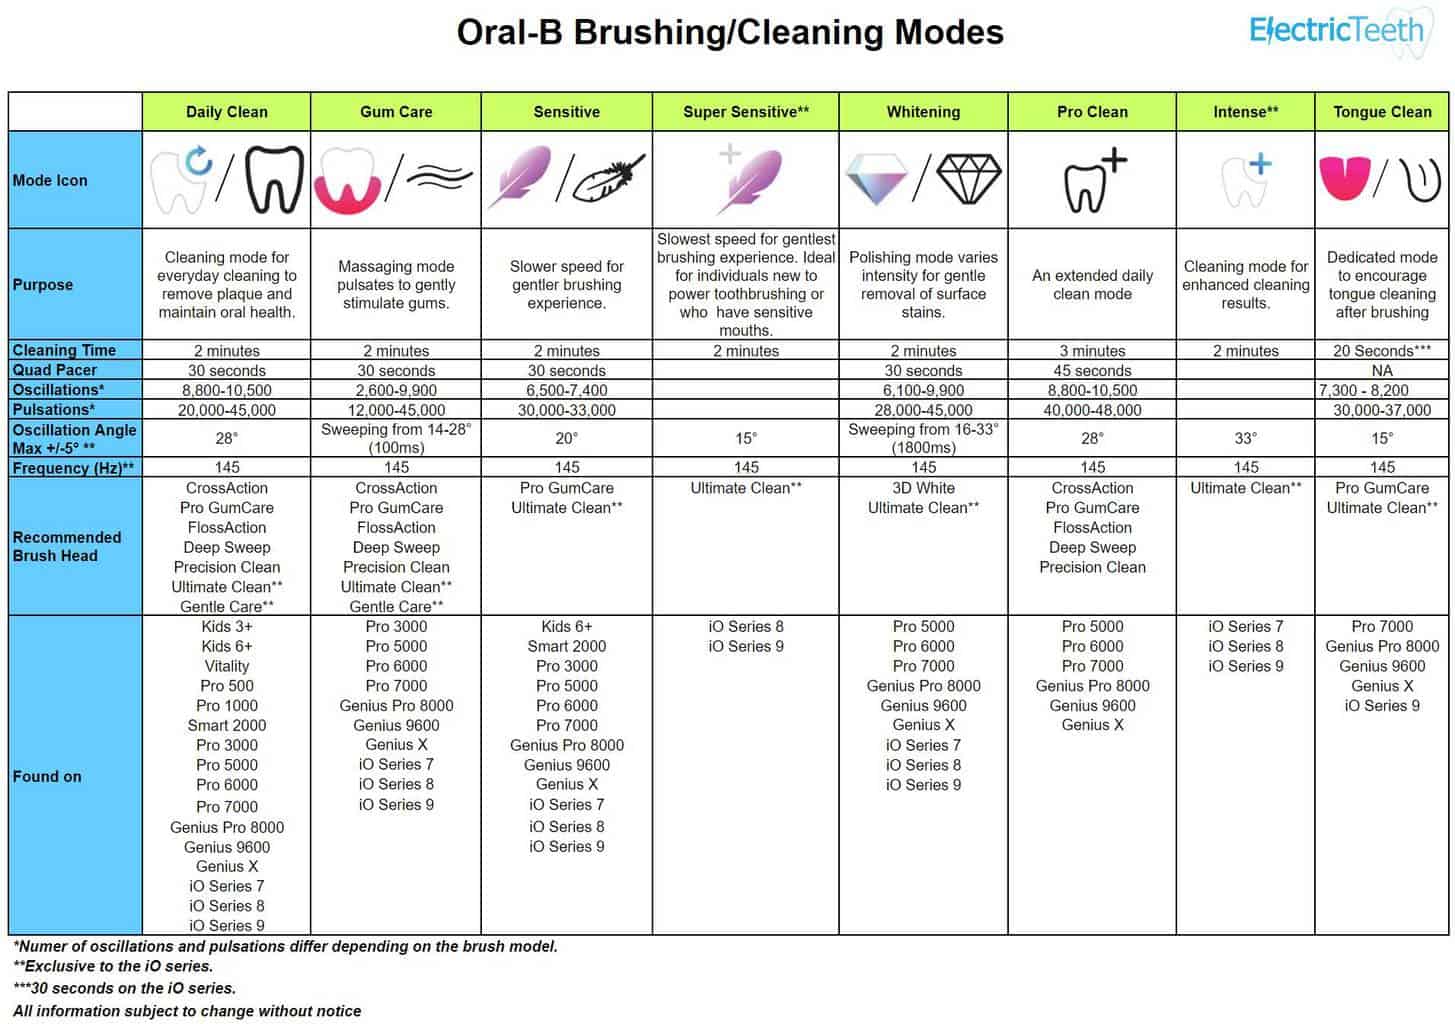 Oral-B cleaning modes explained 5